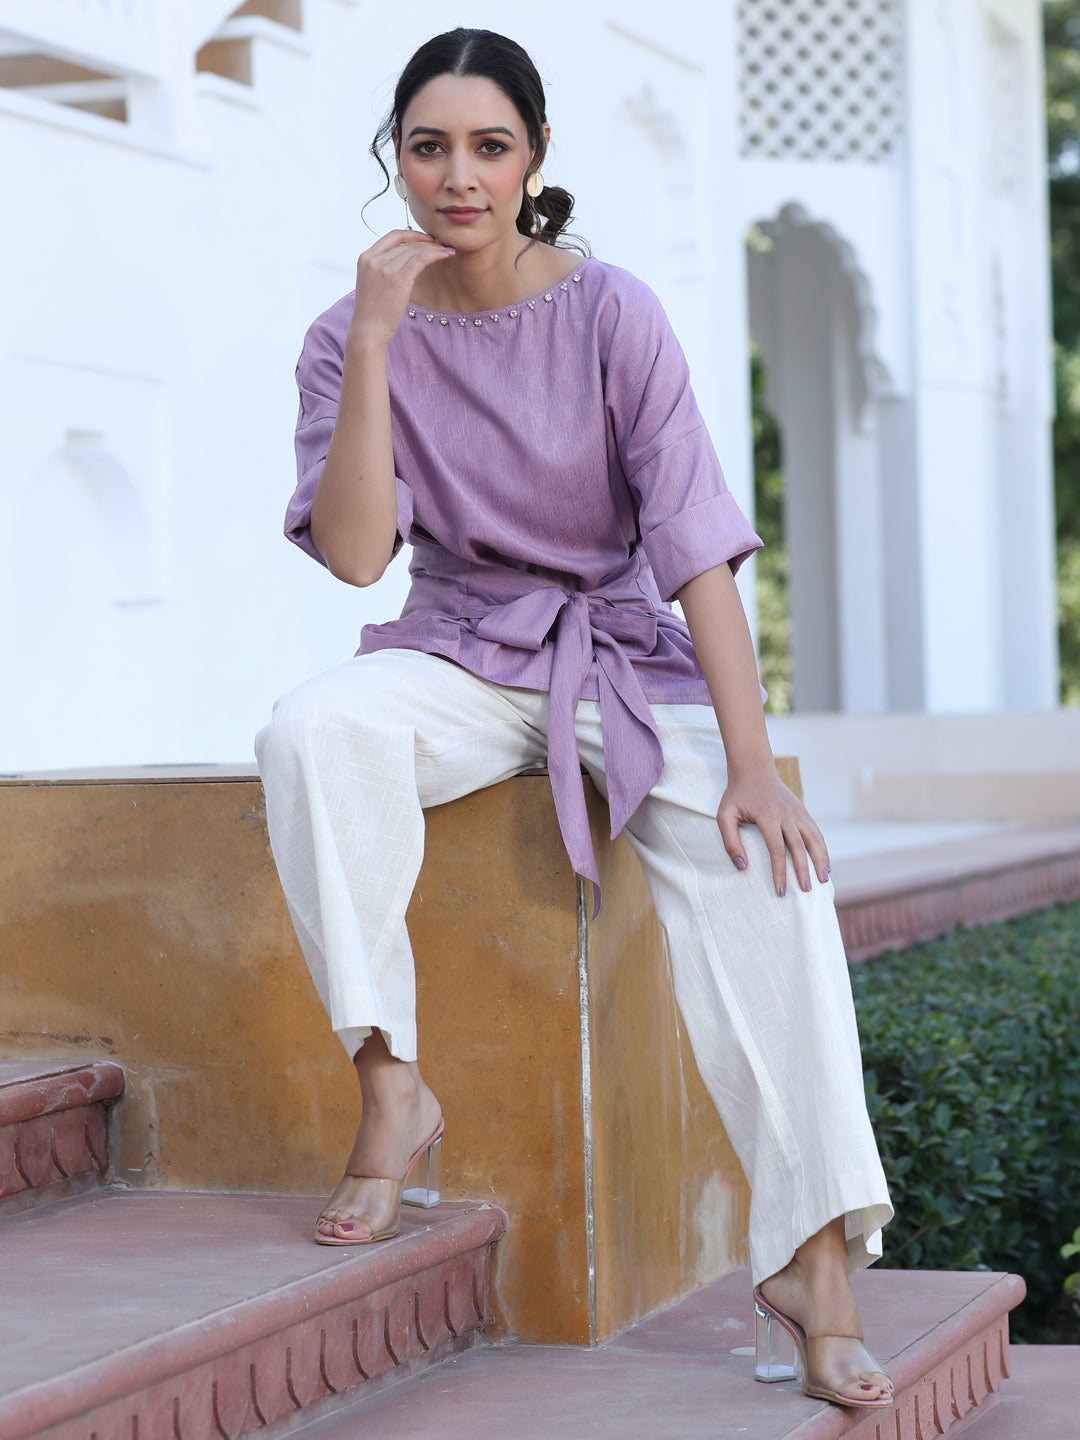 A Mauve Color Self Weaved Embellished Top With Tie-Up At The Waist And Extended Sleeves Top With Cotton Off-White Flared Pants